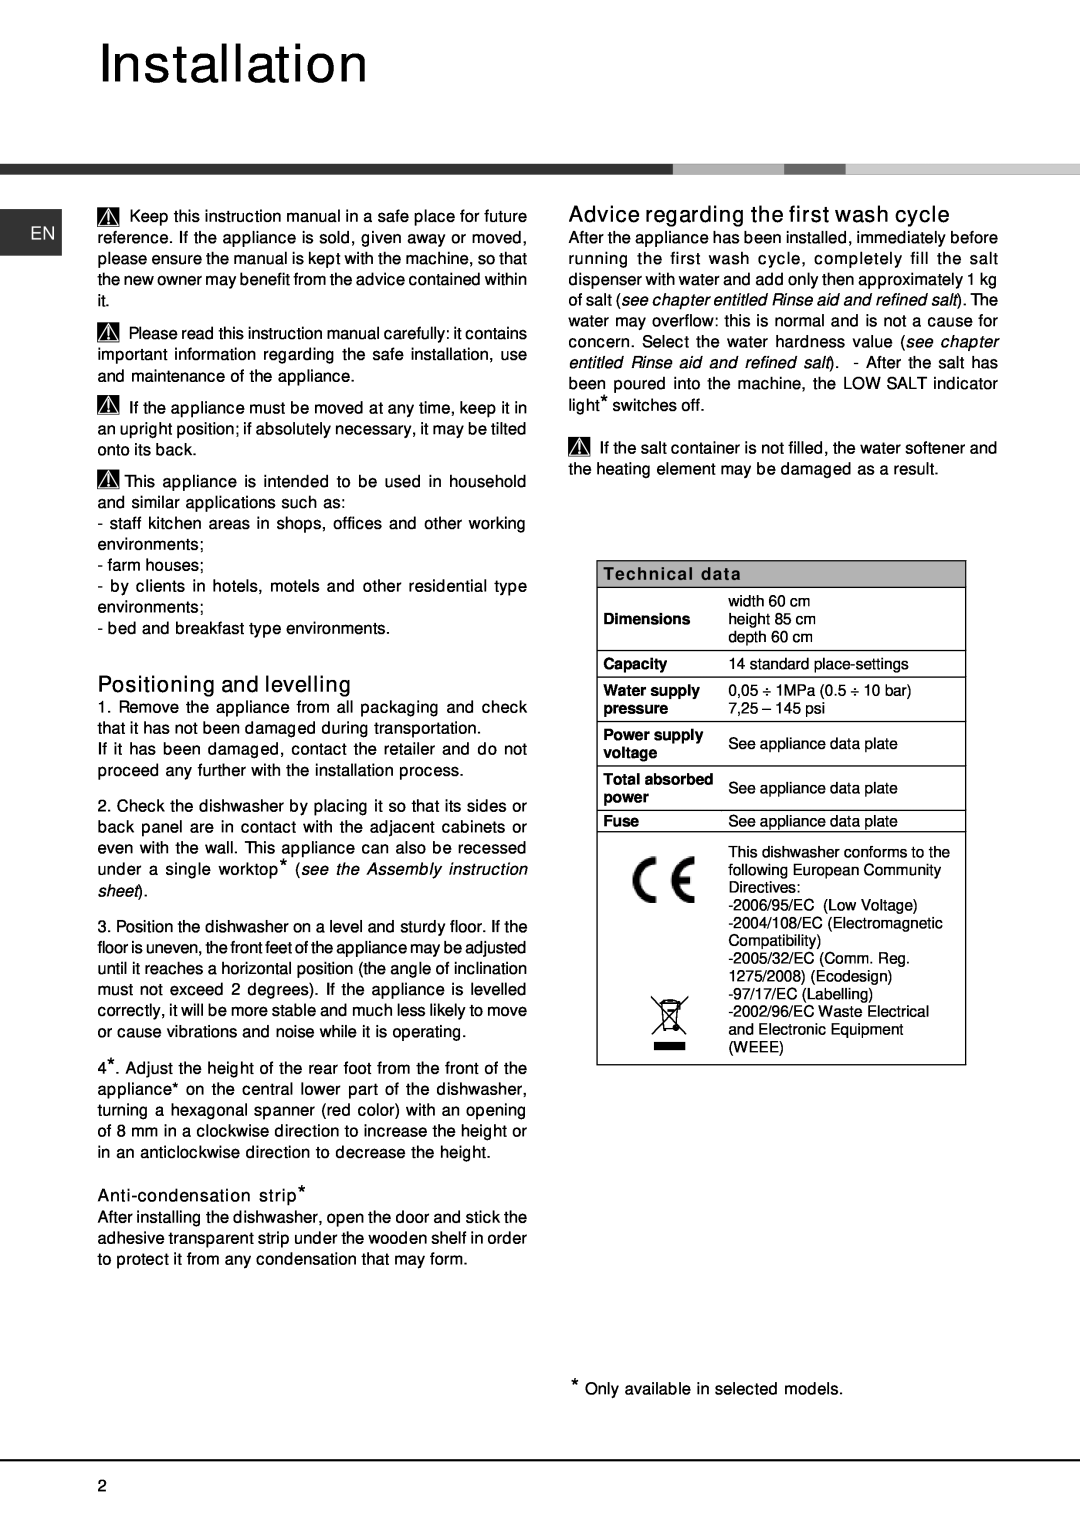 Hotpoint FDEF 4101 manual Installation, Positioning and levelling, Advice regarding the first wash cycle 